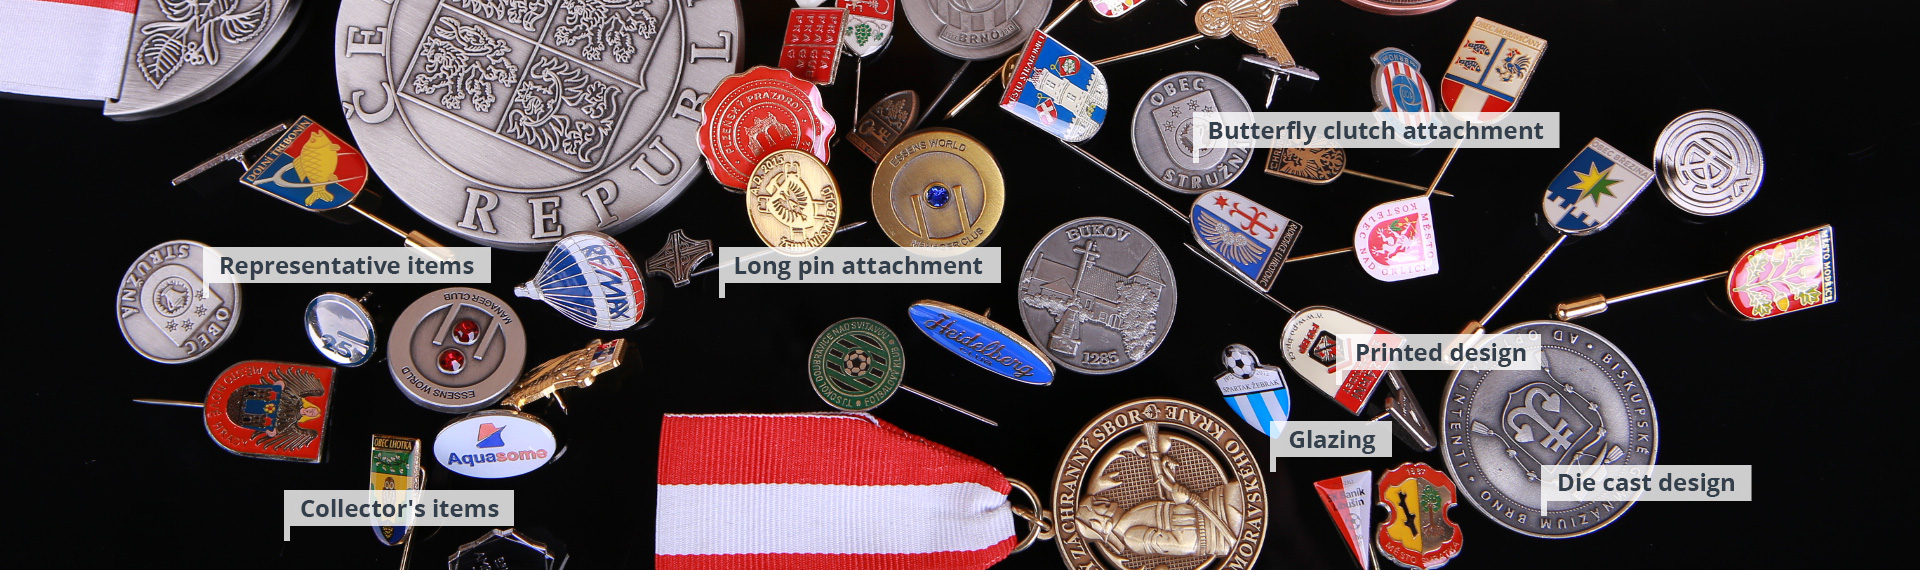 Lapel pins, medals, coins, awards and decorations